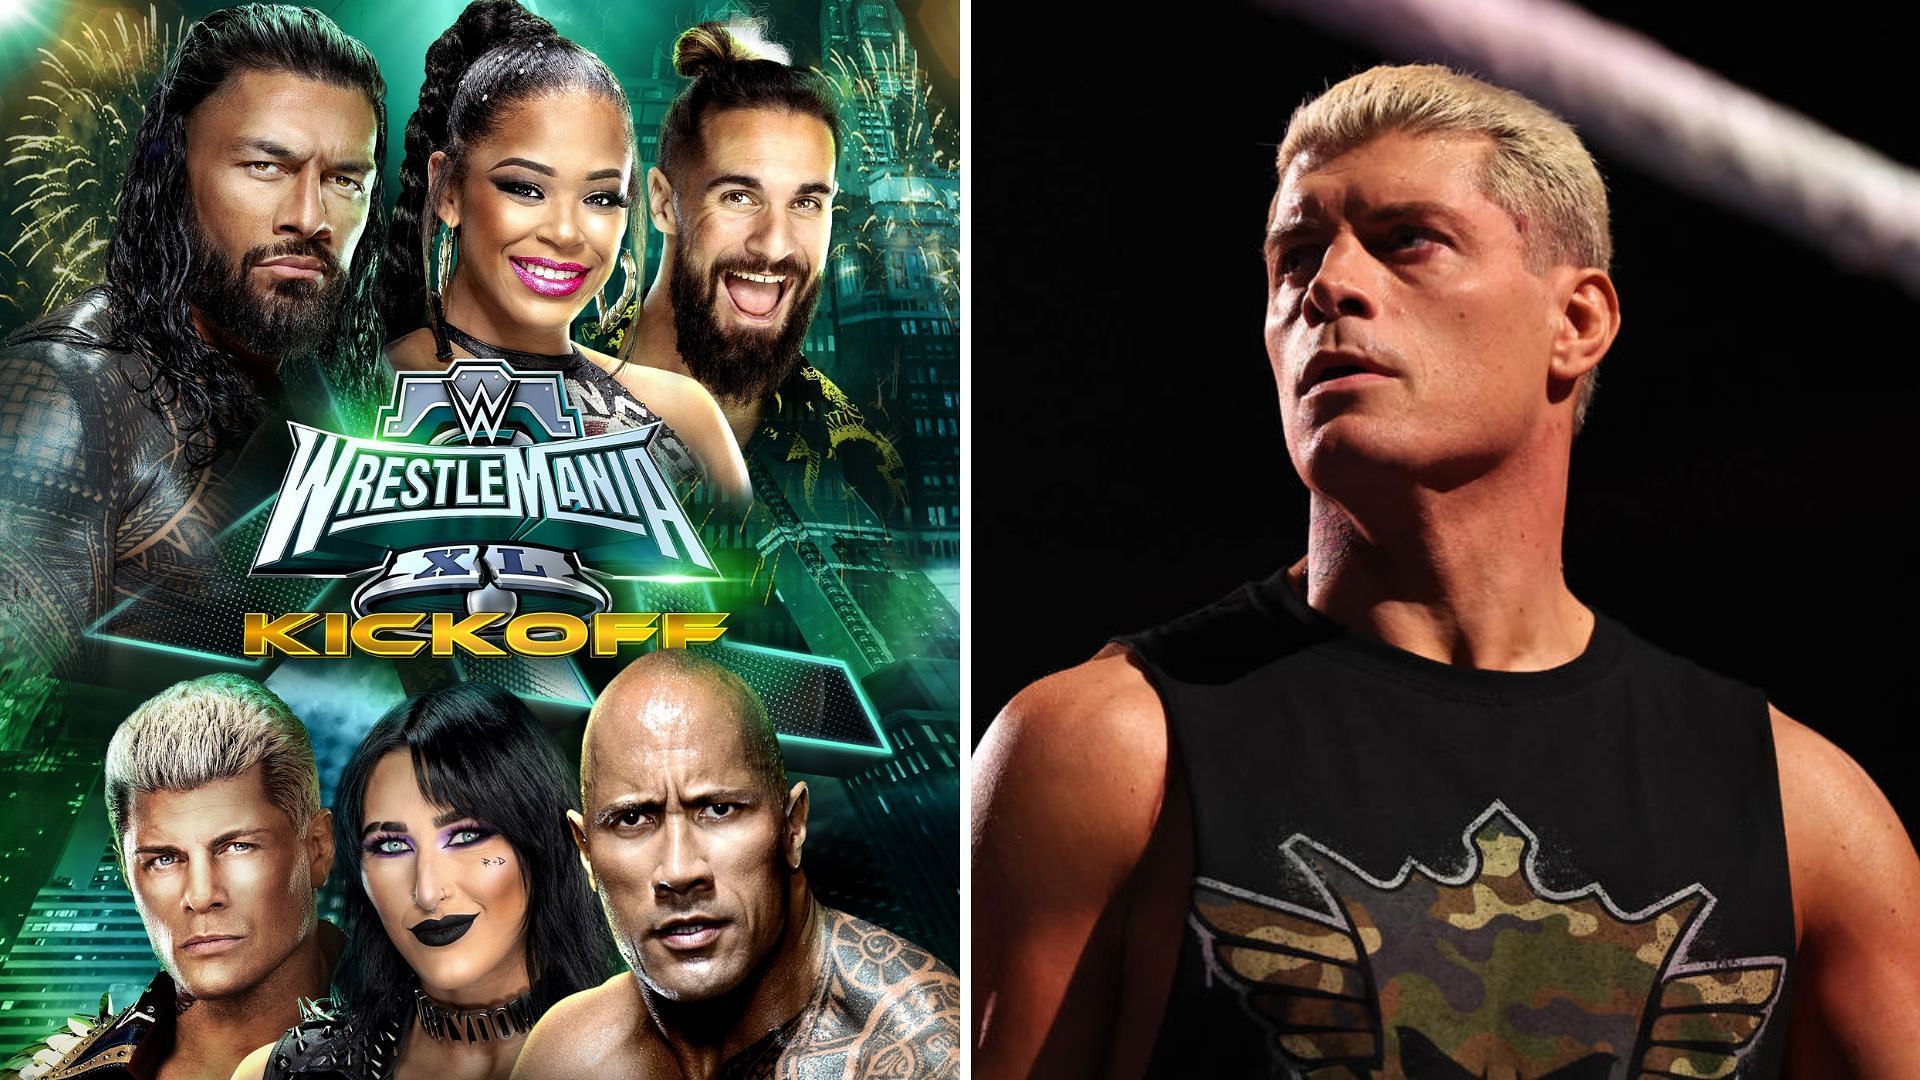 Cody Rhodes will be present at the WrestleMania 40 Kickoff press event [Image credits: WWE